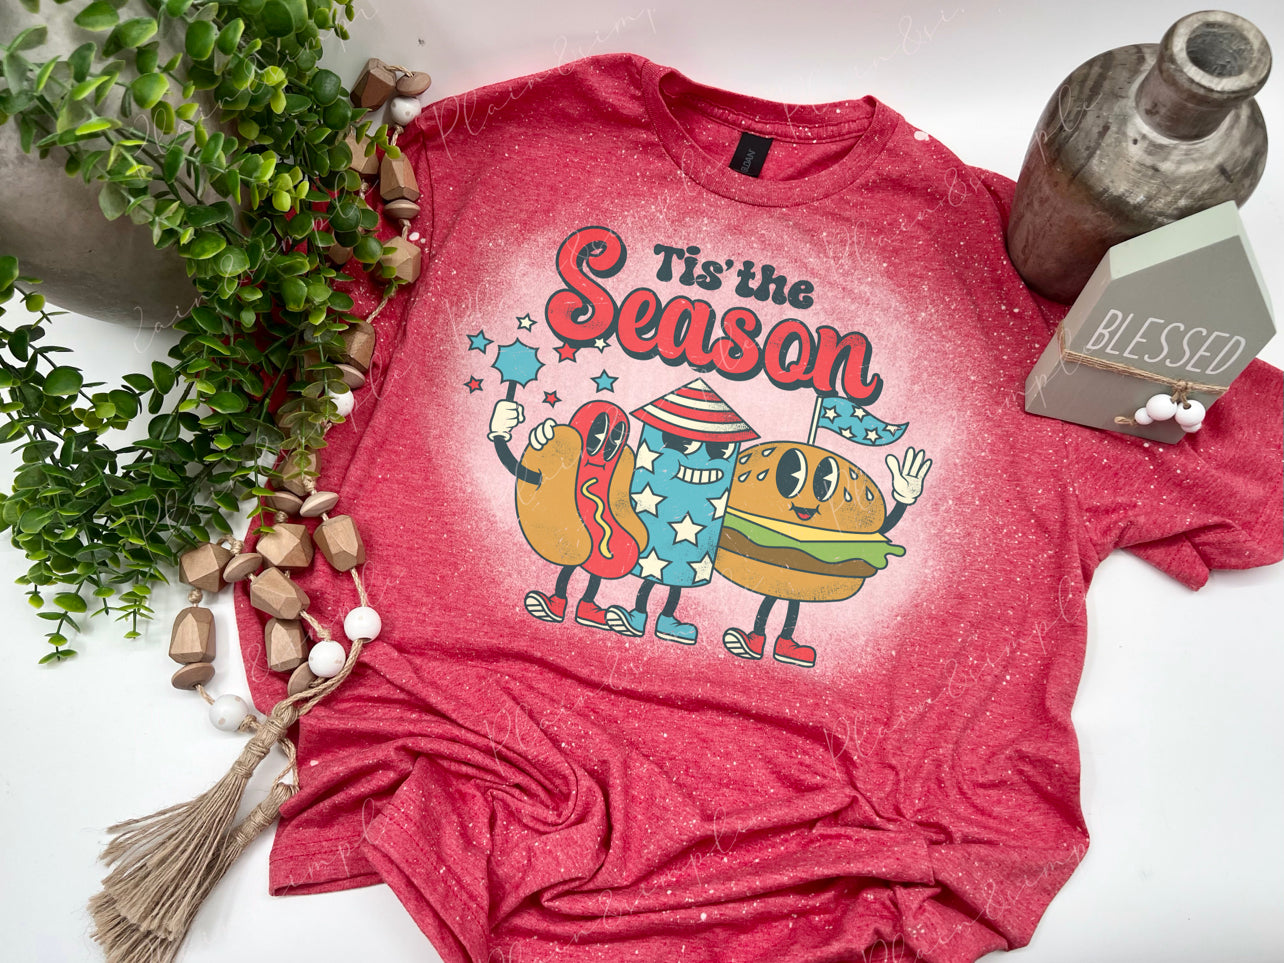 Tis’ The Season - H. Red - Bleached Tee